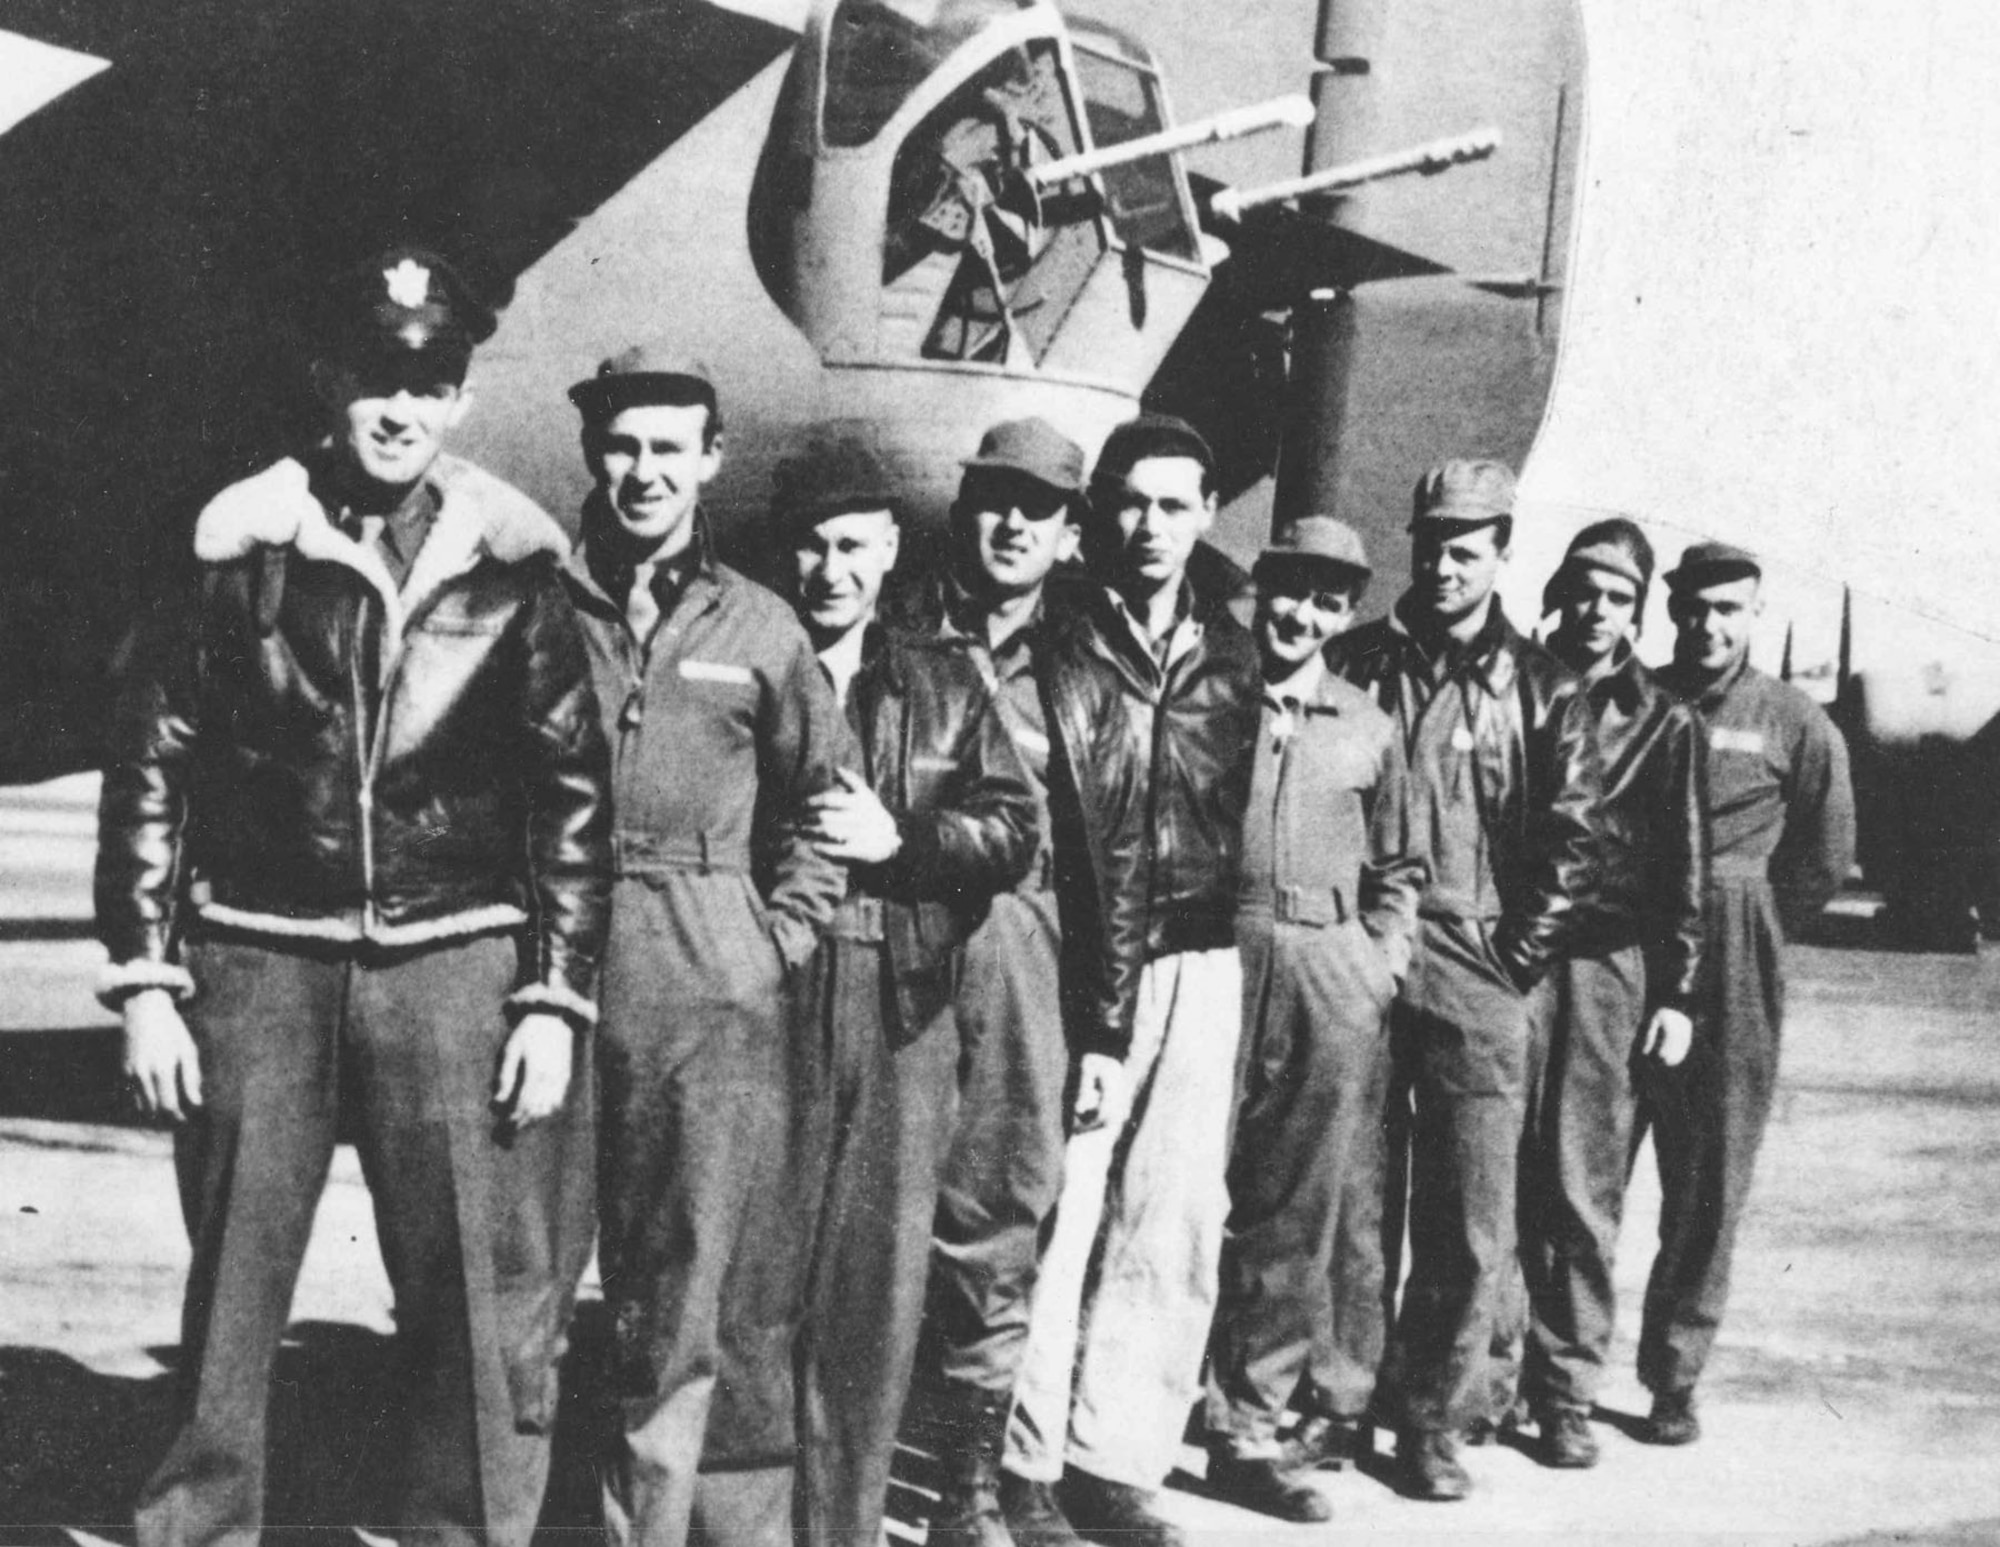 The ill-fated crew of the Consolidated B-24D "Lady Be Good," from the left: 1Lt. W.J. Hatton, pilot; 2Lt. R.F. Toner, copilot; 2Lt. D.P. Hays, navigator; 2Lt. J.S. Woravka, bombardier; TSgt. H.J. Ripslinger, engineer; TSgt. R.E. LaMotte, radio operator; SSgt. G.E. Shelly, gunner; SSgt. V.L. Moore, gunner; and SSgt. S.E. Adams, gunner. (U.S. Air Force photo)